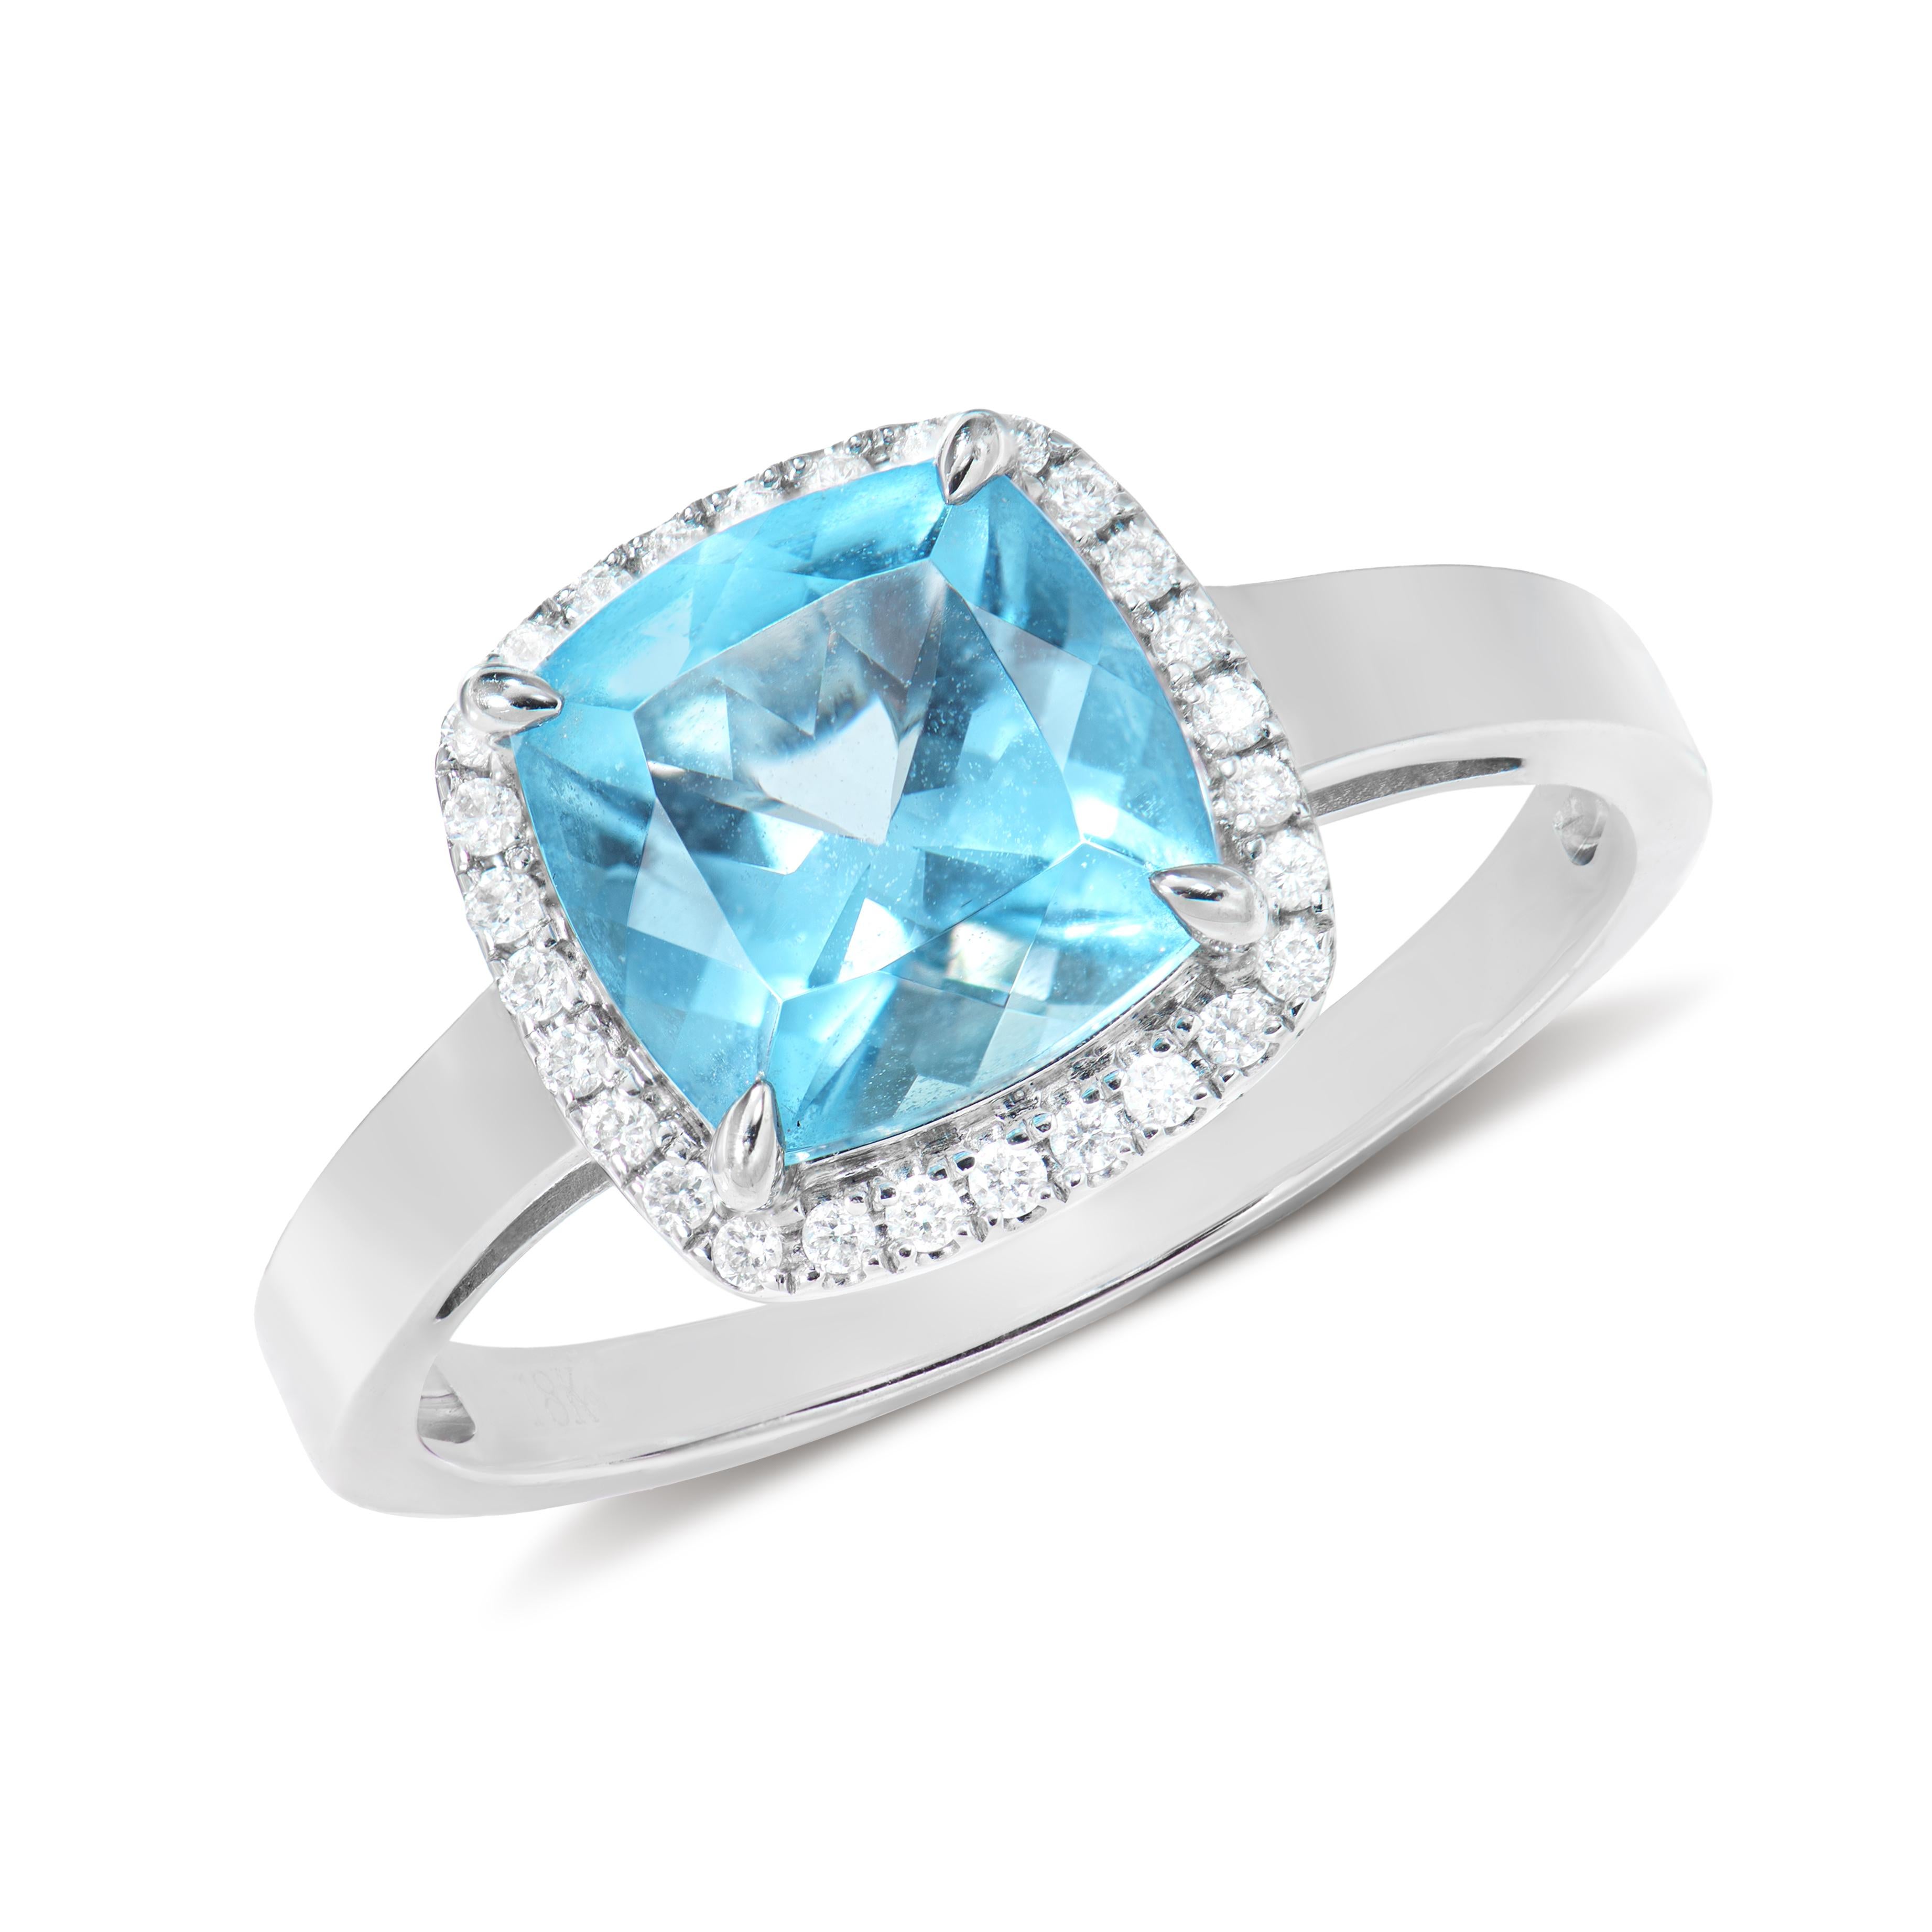 Cushion Cut 2.51 Carat Sky Blue Topaz Fancy Ring in 18Karat White Gold with White Diamond. For Sale